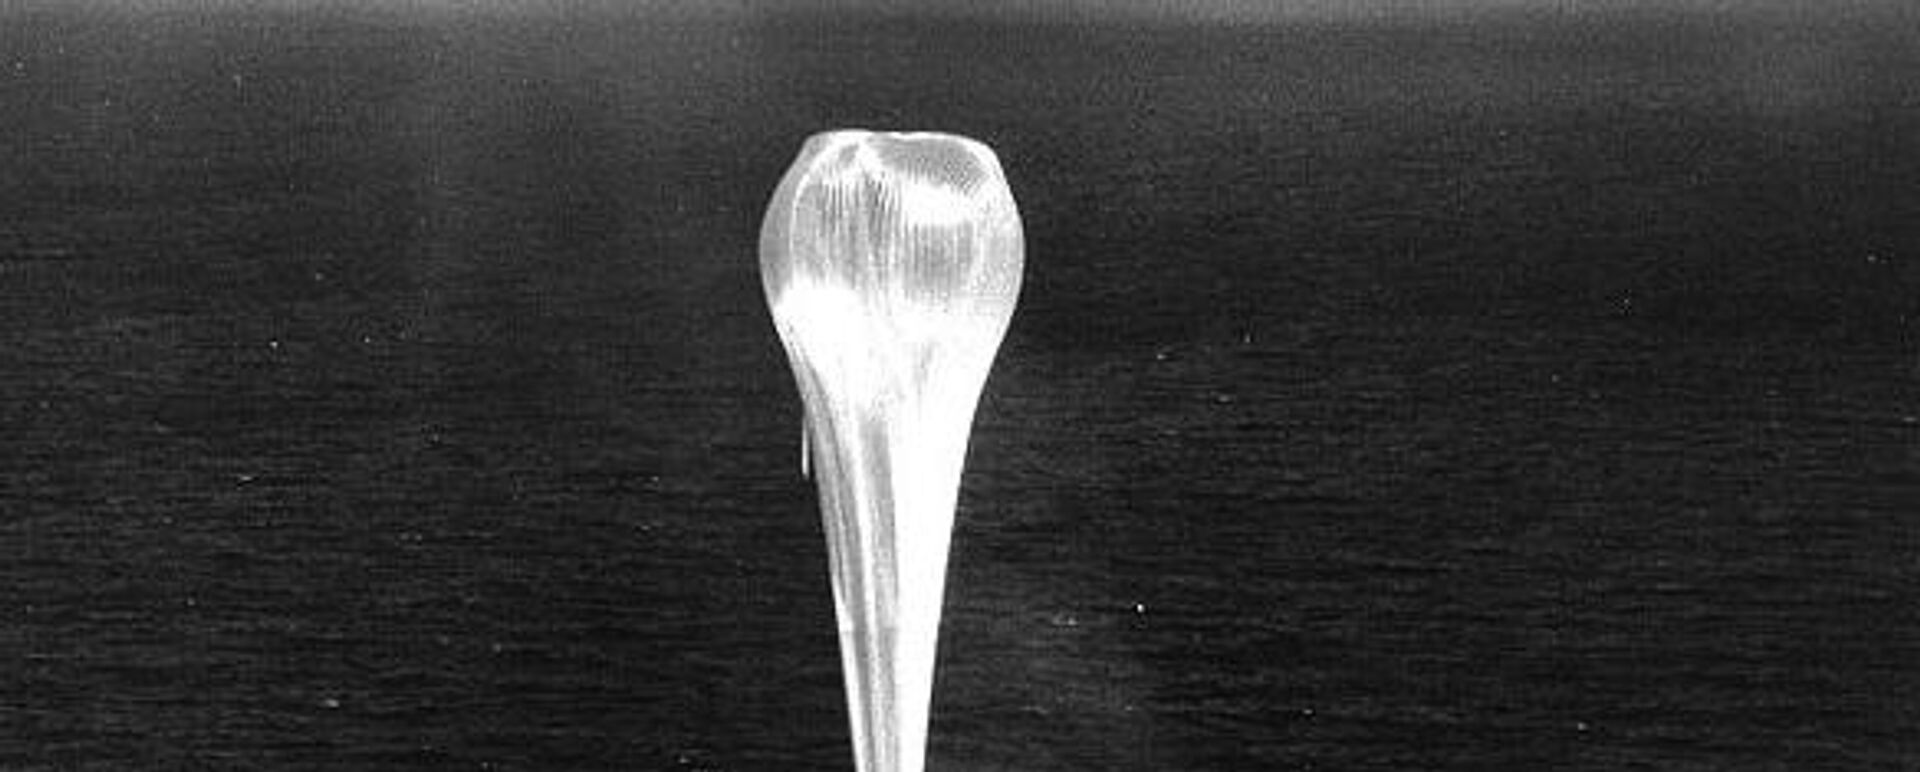 A spy balloon from Project Genetrix is launched from the aircraft carrier USS Valley Forge, 1956 - Sputnik International, 1920, 09.02.2023